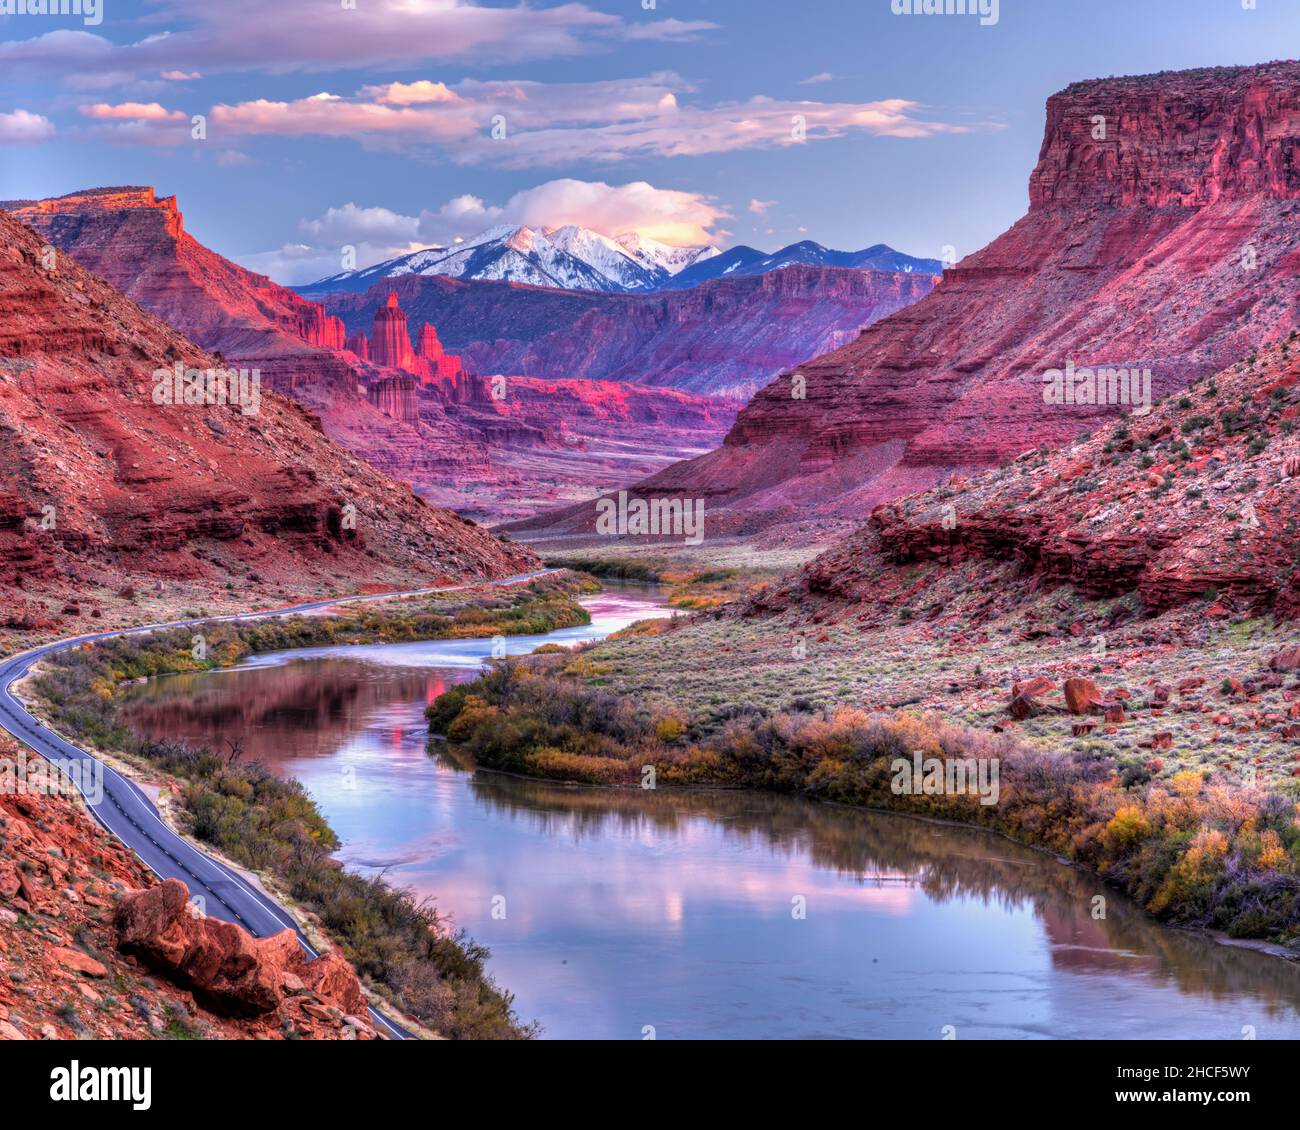 The Colorado River winds its way toward Fisher Towers glowing pink in the late afternoon Autumn light with the snow-capped La Sal Mountains behind. Stock Photo